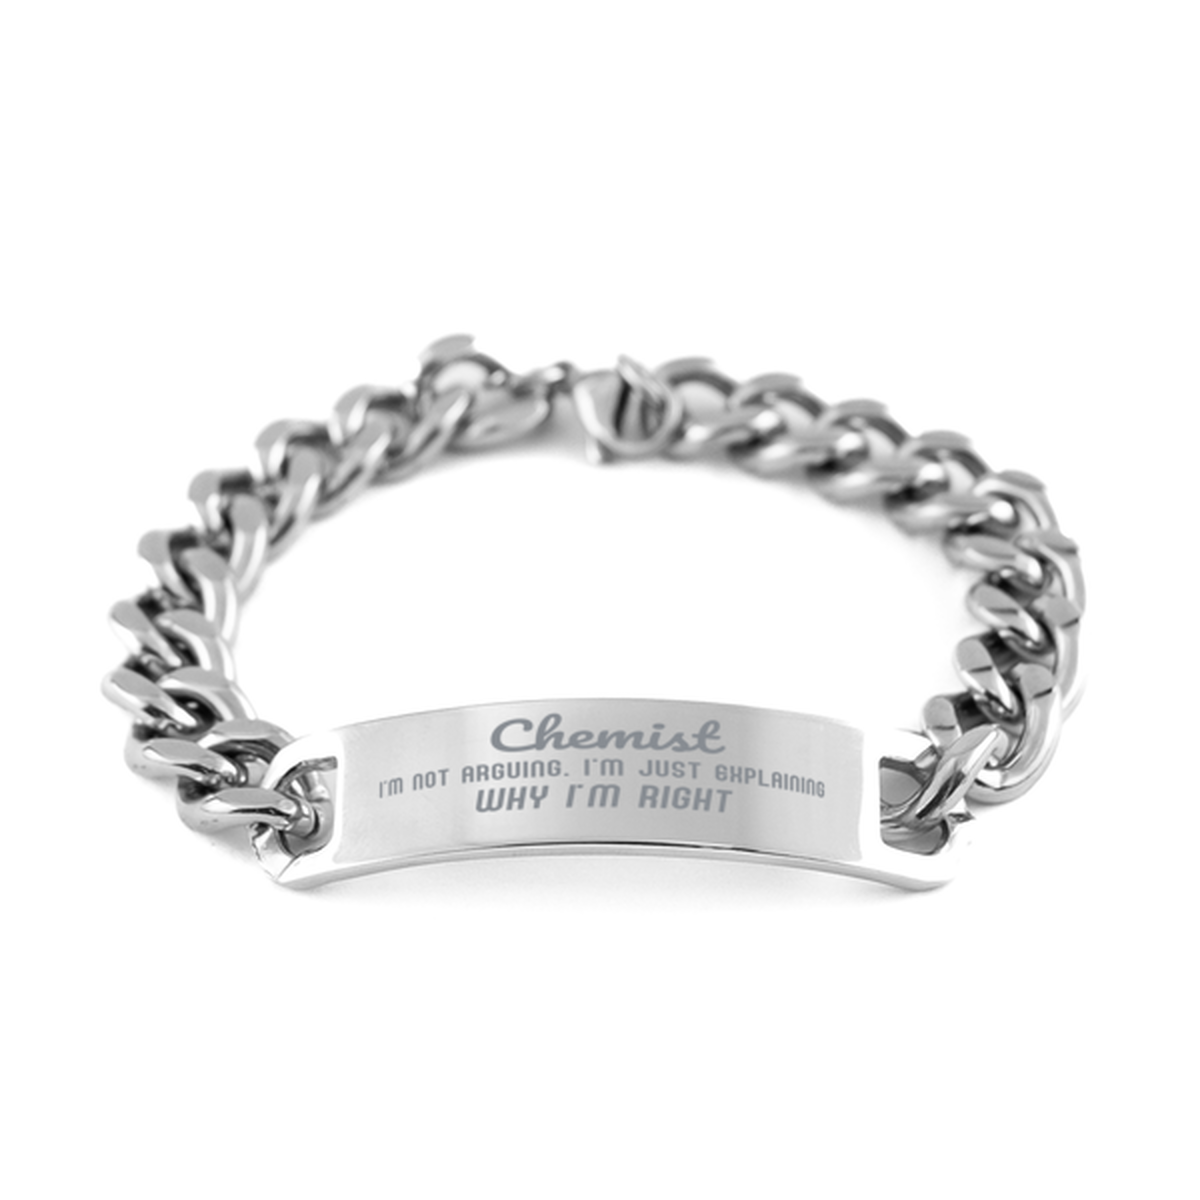 Chemist I'm not Arguing. I'm Just Explaining Why I'm RIGHT Cuban Chain Stainless Steel Bracelet, Graduation Birthday Christmas Chemist Gifts For Chemist Funny Saying Quote Present for Men Women Coworker